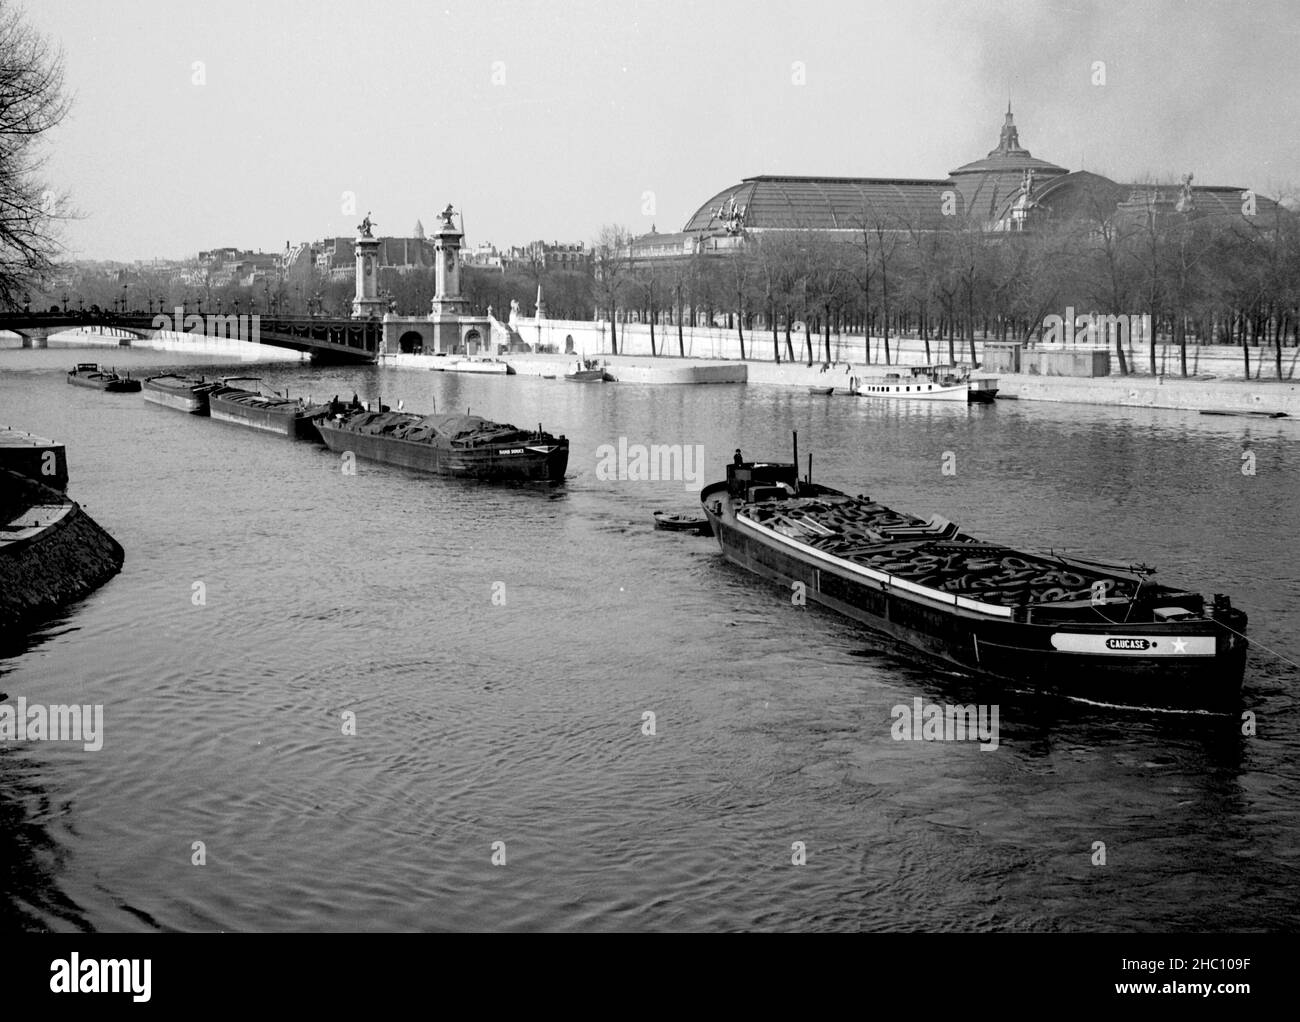 Paris River Seine with five cargo barges near Pont Alexandre III, 1945. The photographer stands on the Pont de la Concorde. The tow barge has already passed the field of vision. The lead barge in sight is loaded with tires. The Grand Palais is in the background. Stock Photo